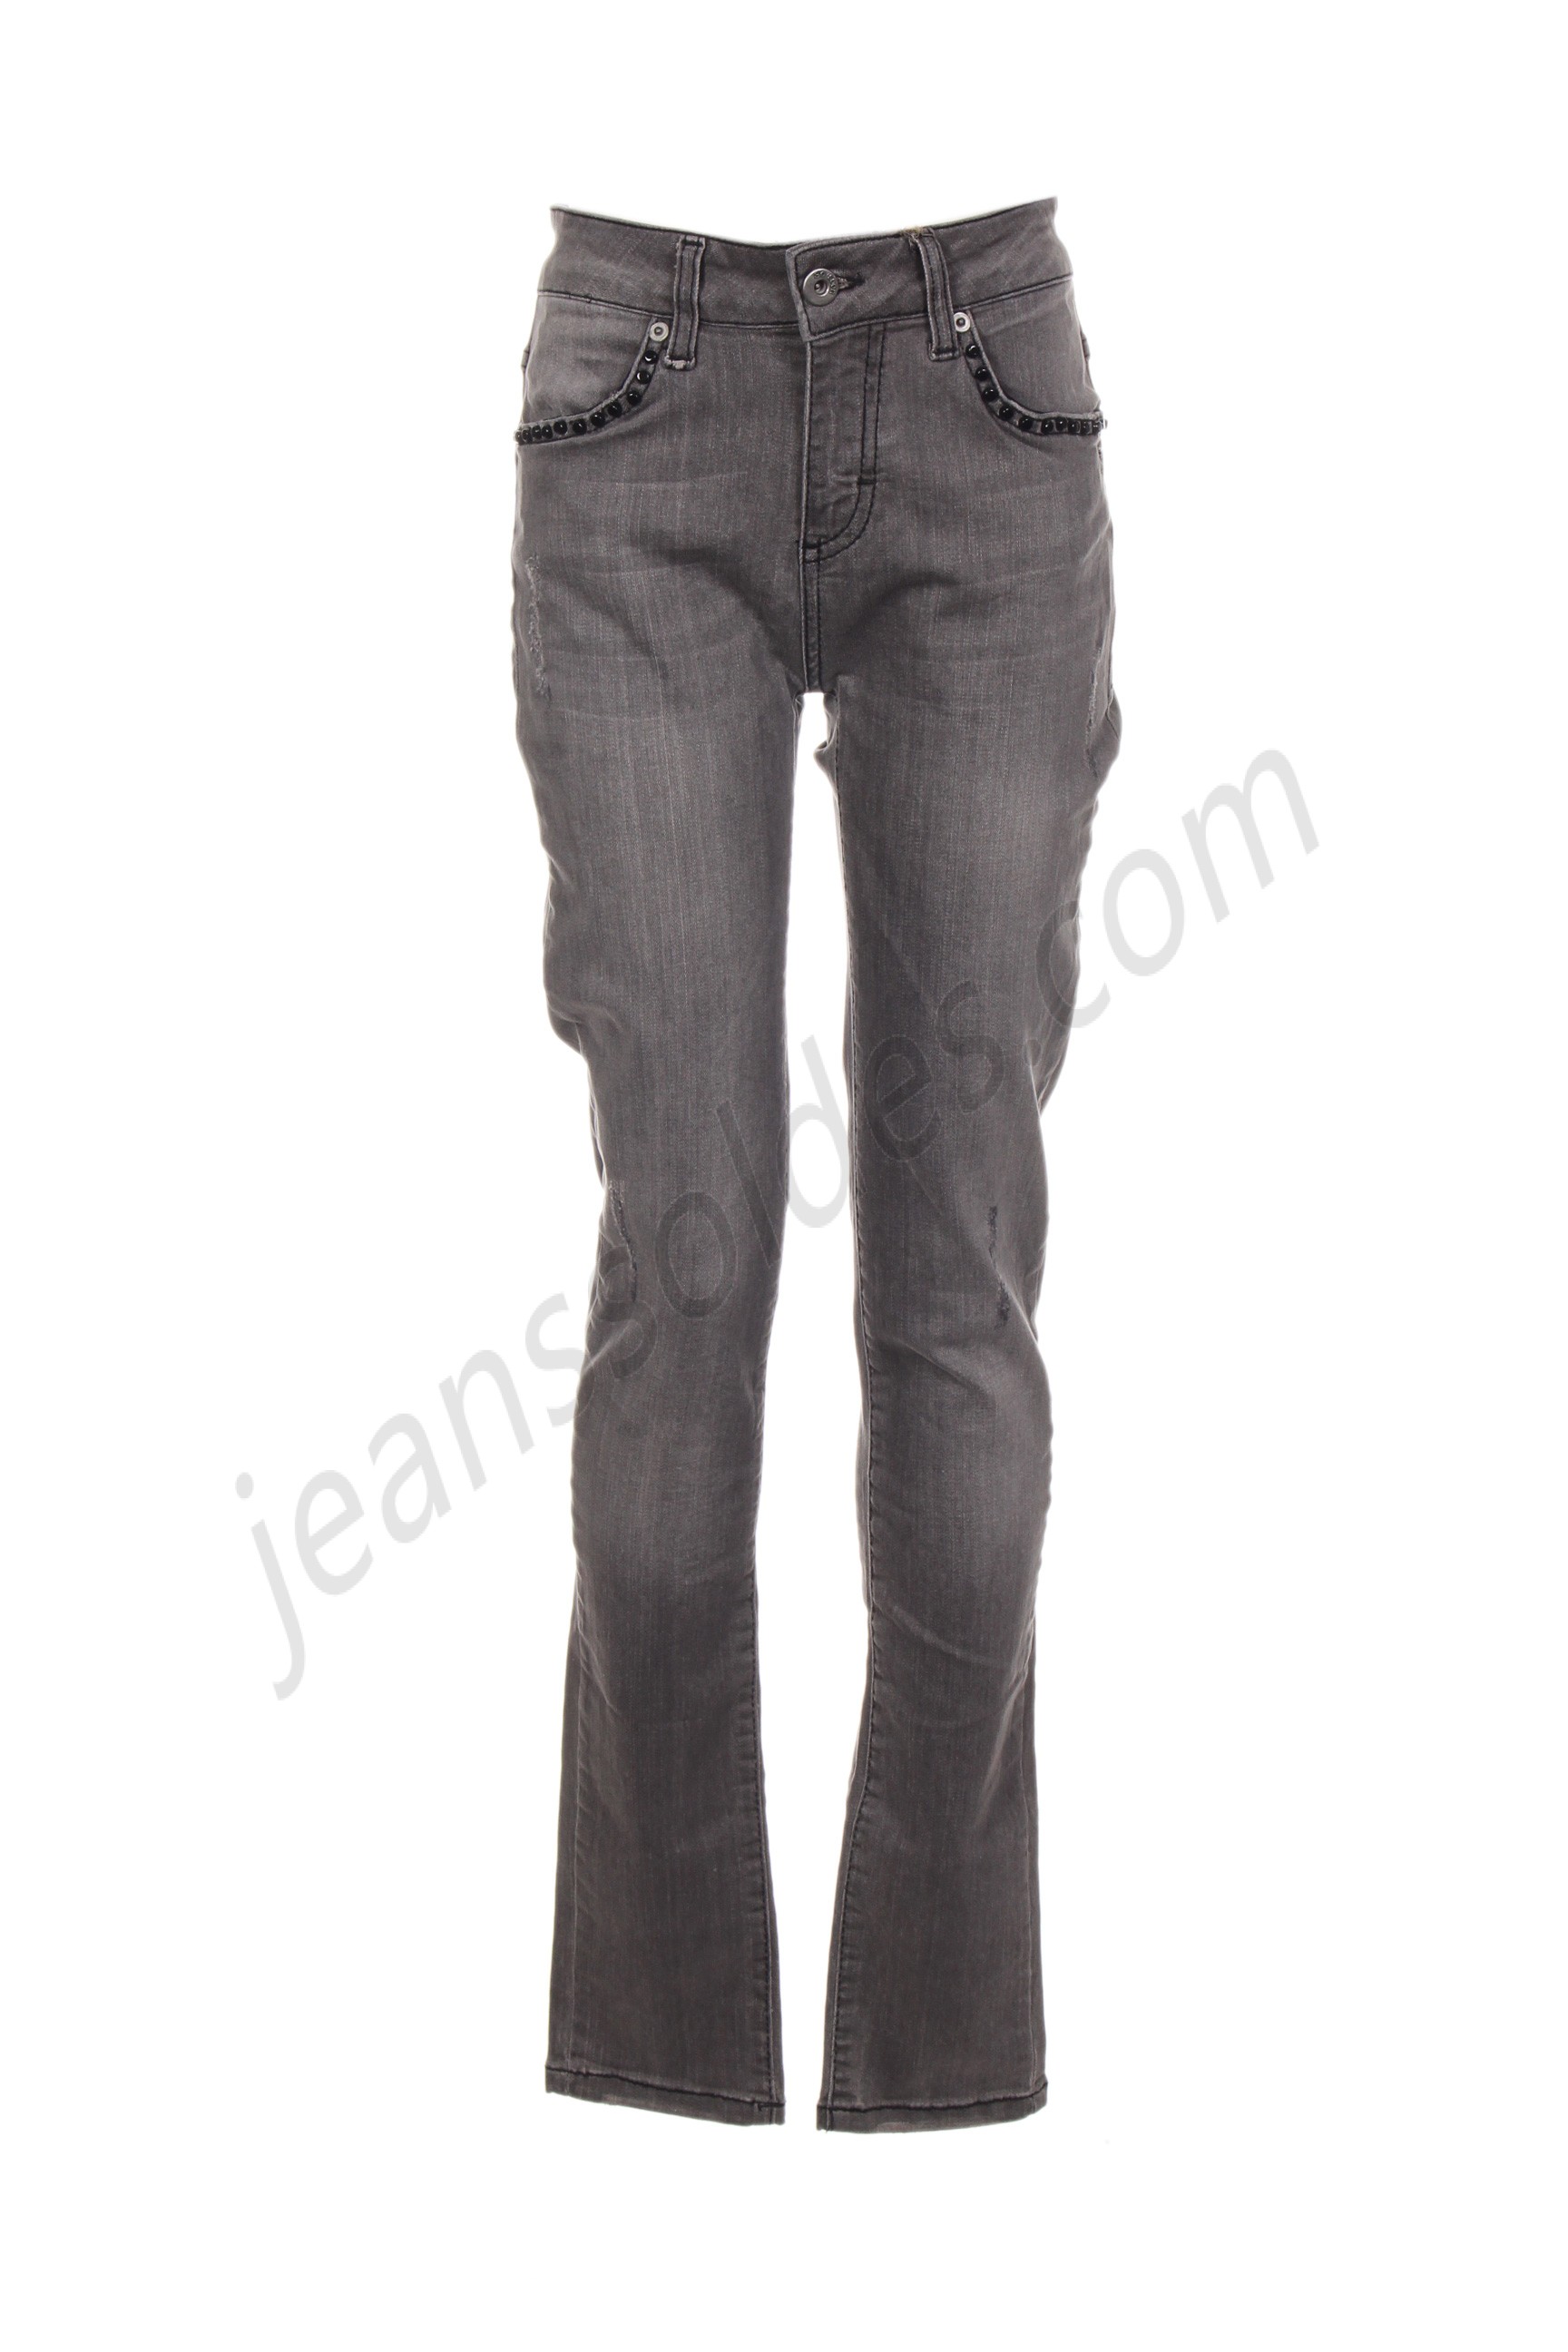 so soon-Jeans coupe slim prix d’amis - so soon-Jeans coupe slim prix d’amis